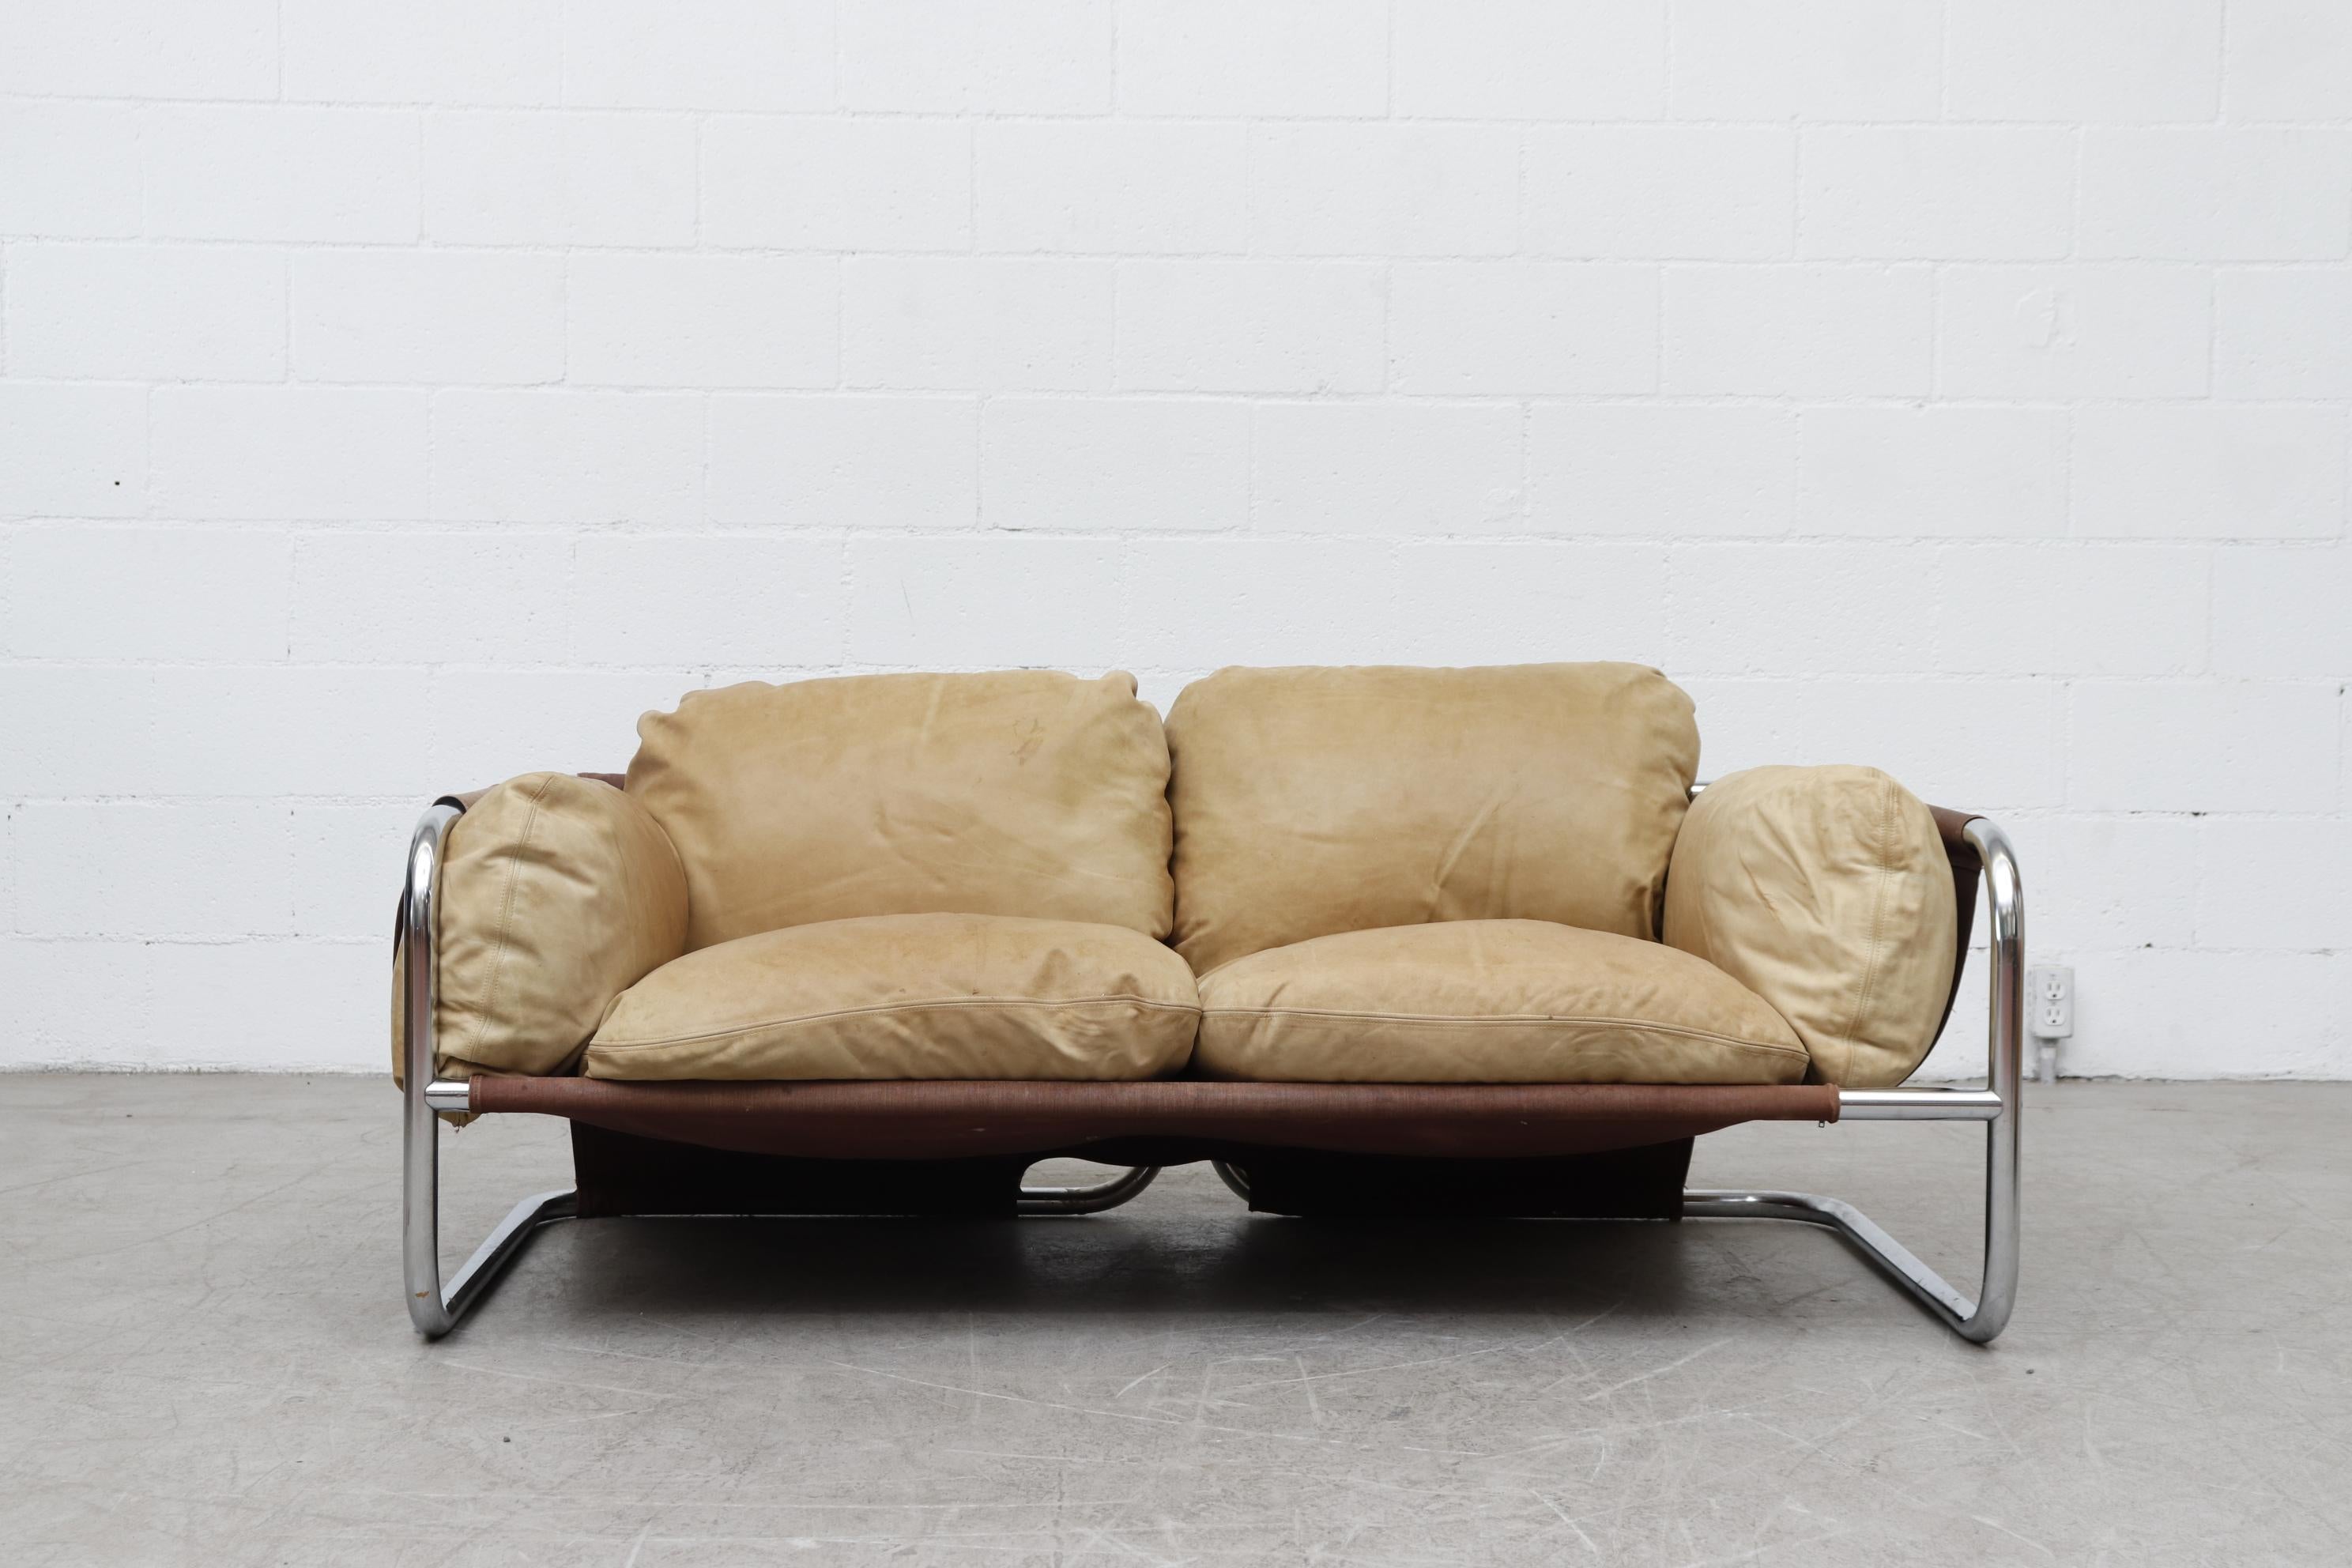 Incredible MOD Leolux midcentury well worn tan leather and chrome framed loveseat with canvas sling support. In original condition with visible patina and wear consistent with its age and use.